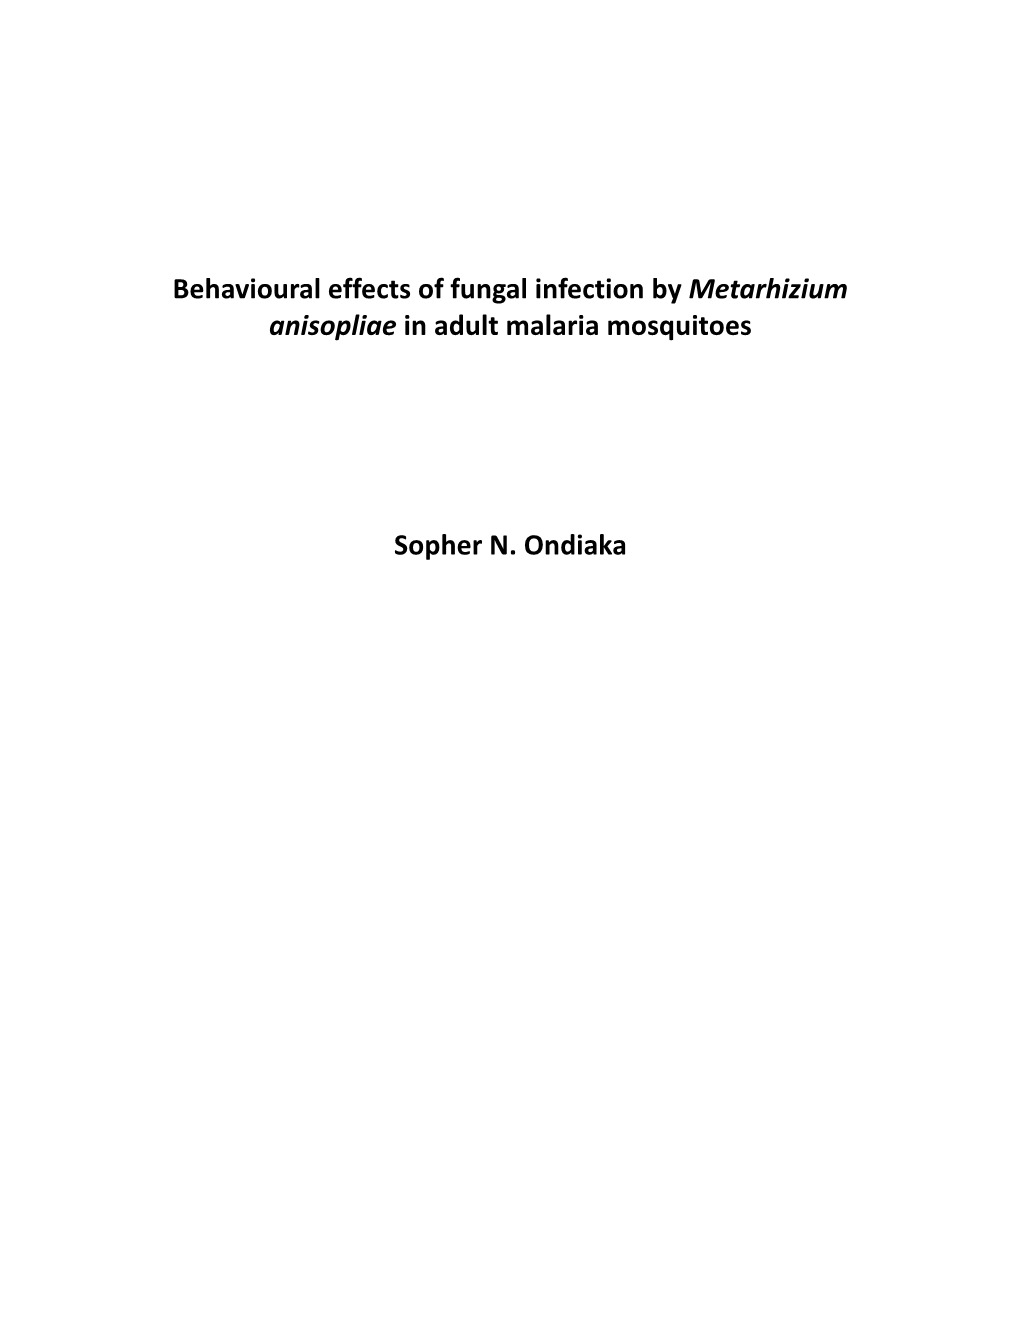 Behavioural Effects of Fungal Infection by Metarhizium Anisopliae in Adult Malaria Mosquitoes